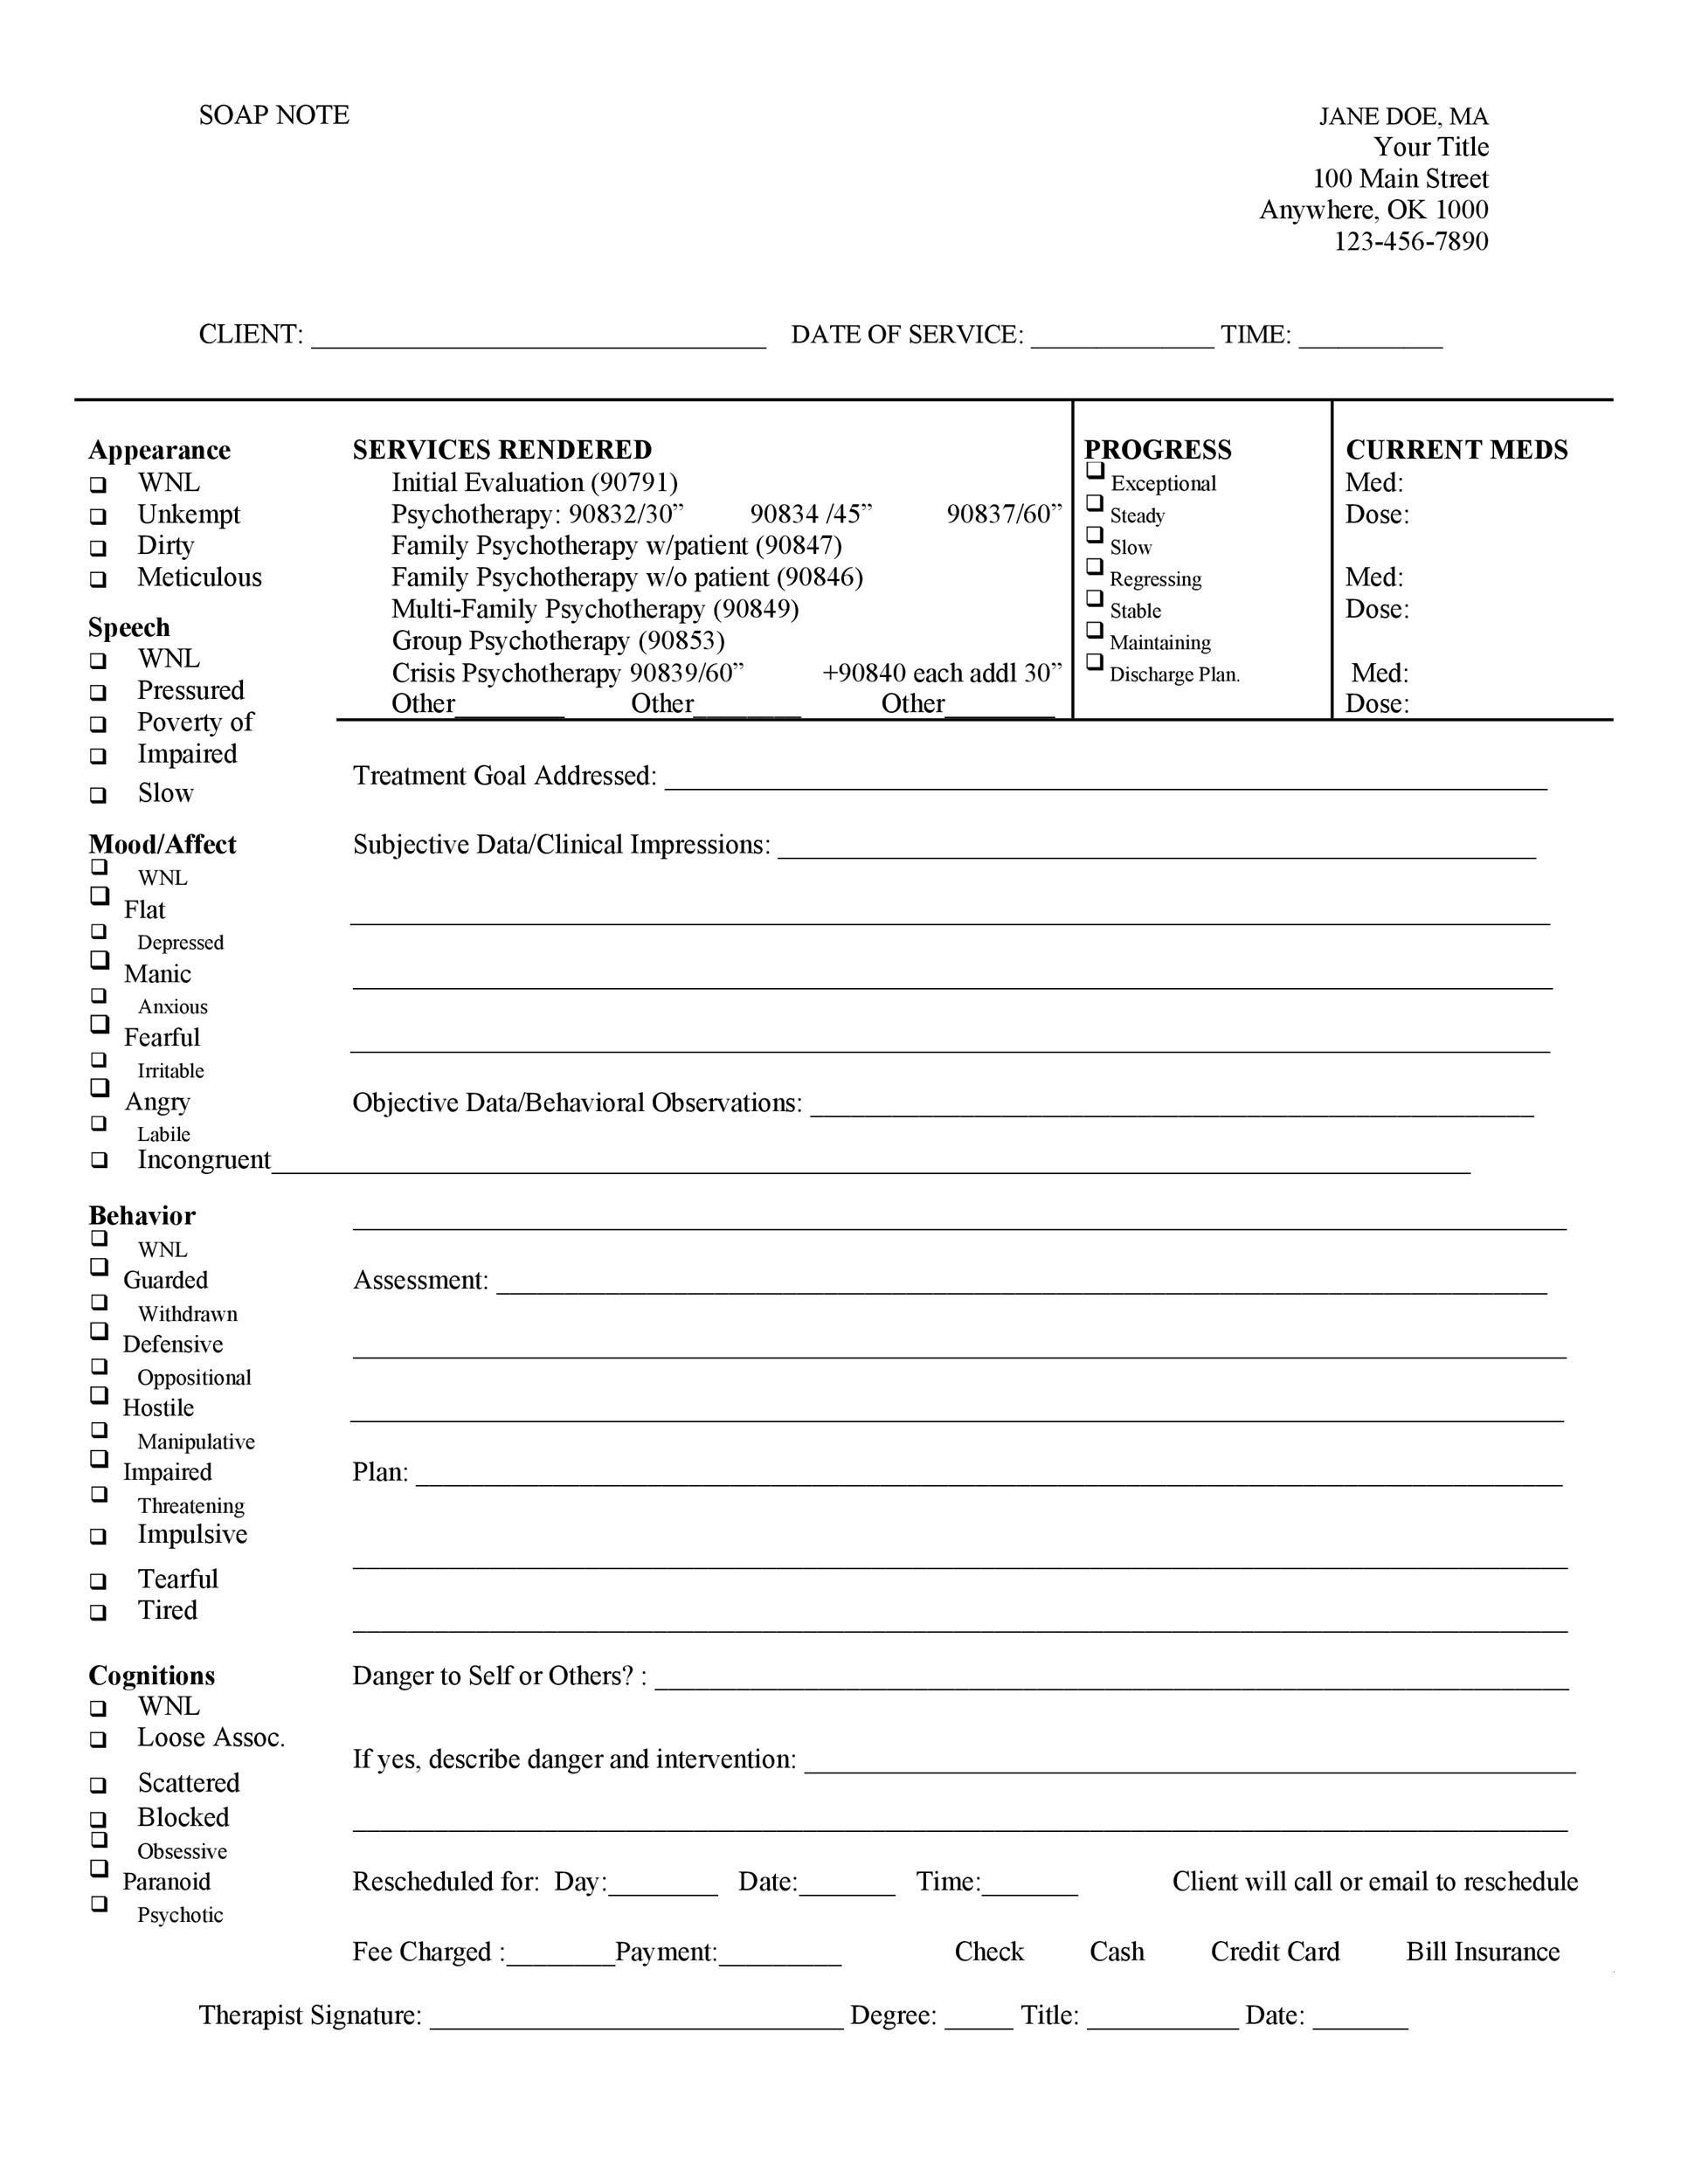 Printable Dental Soap Note Template